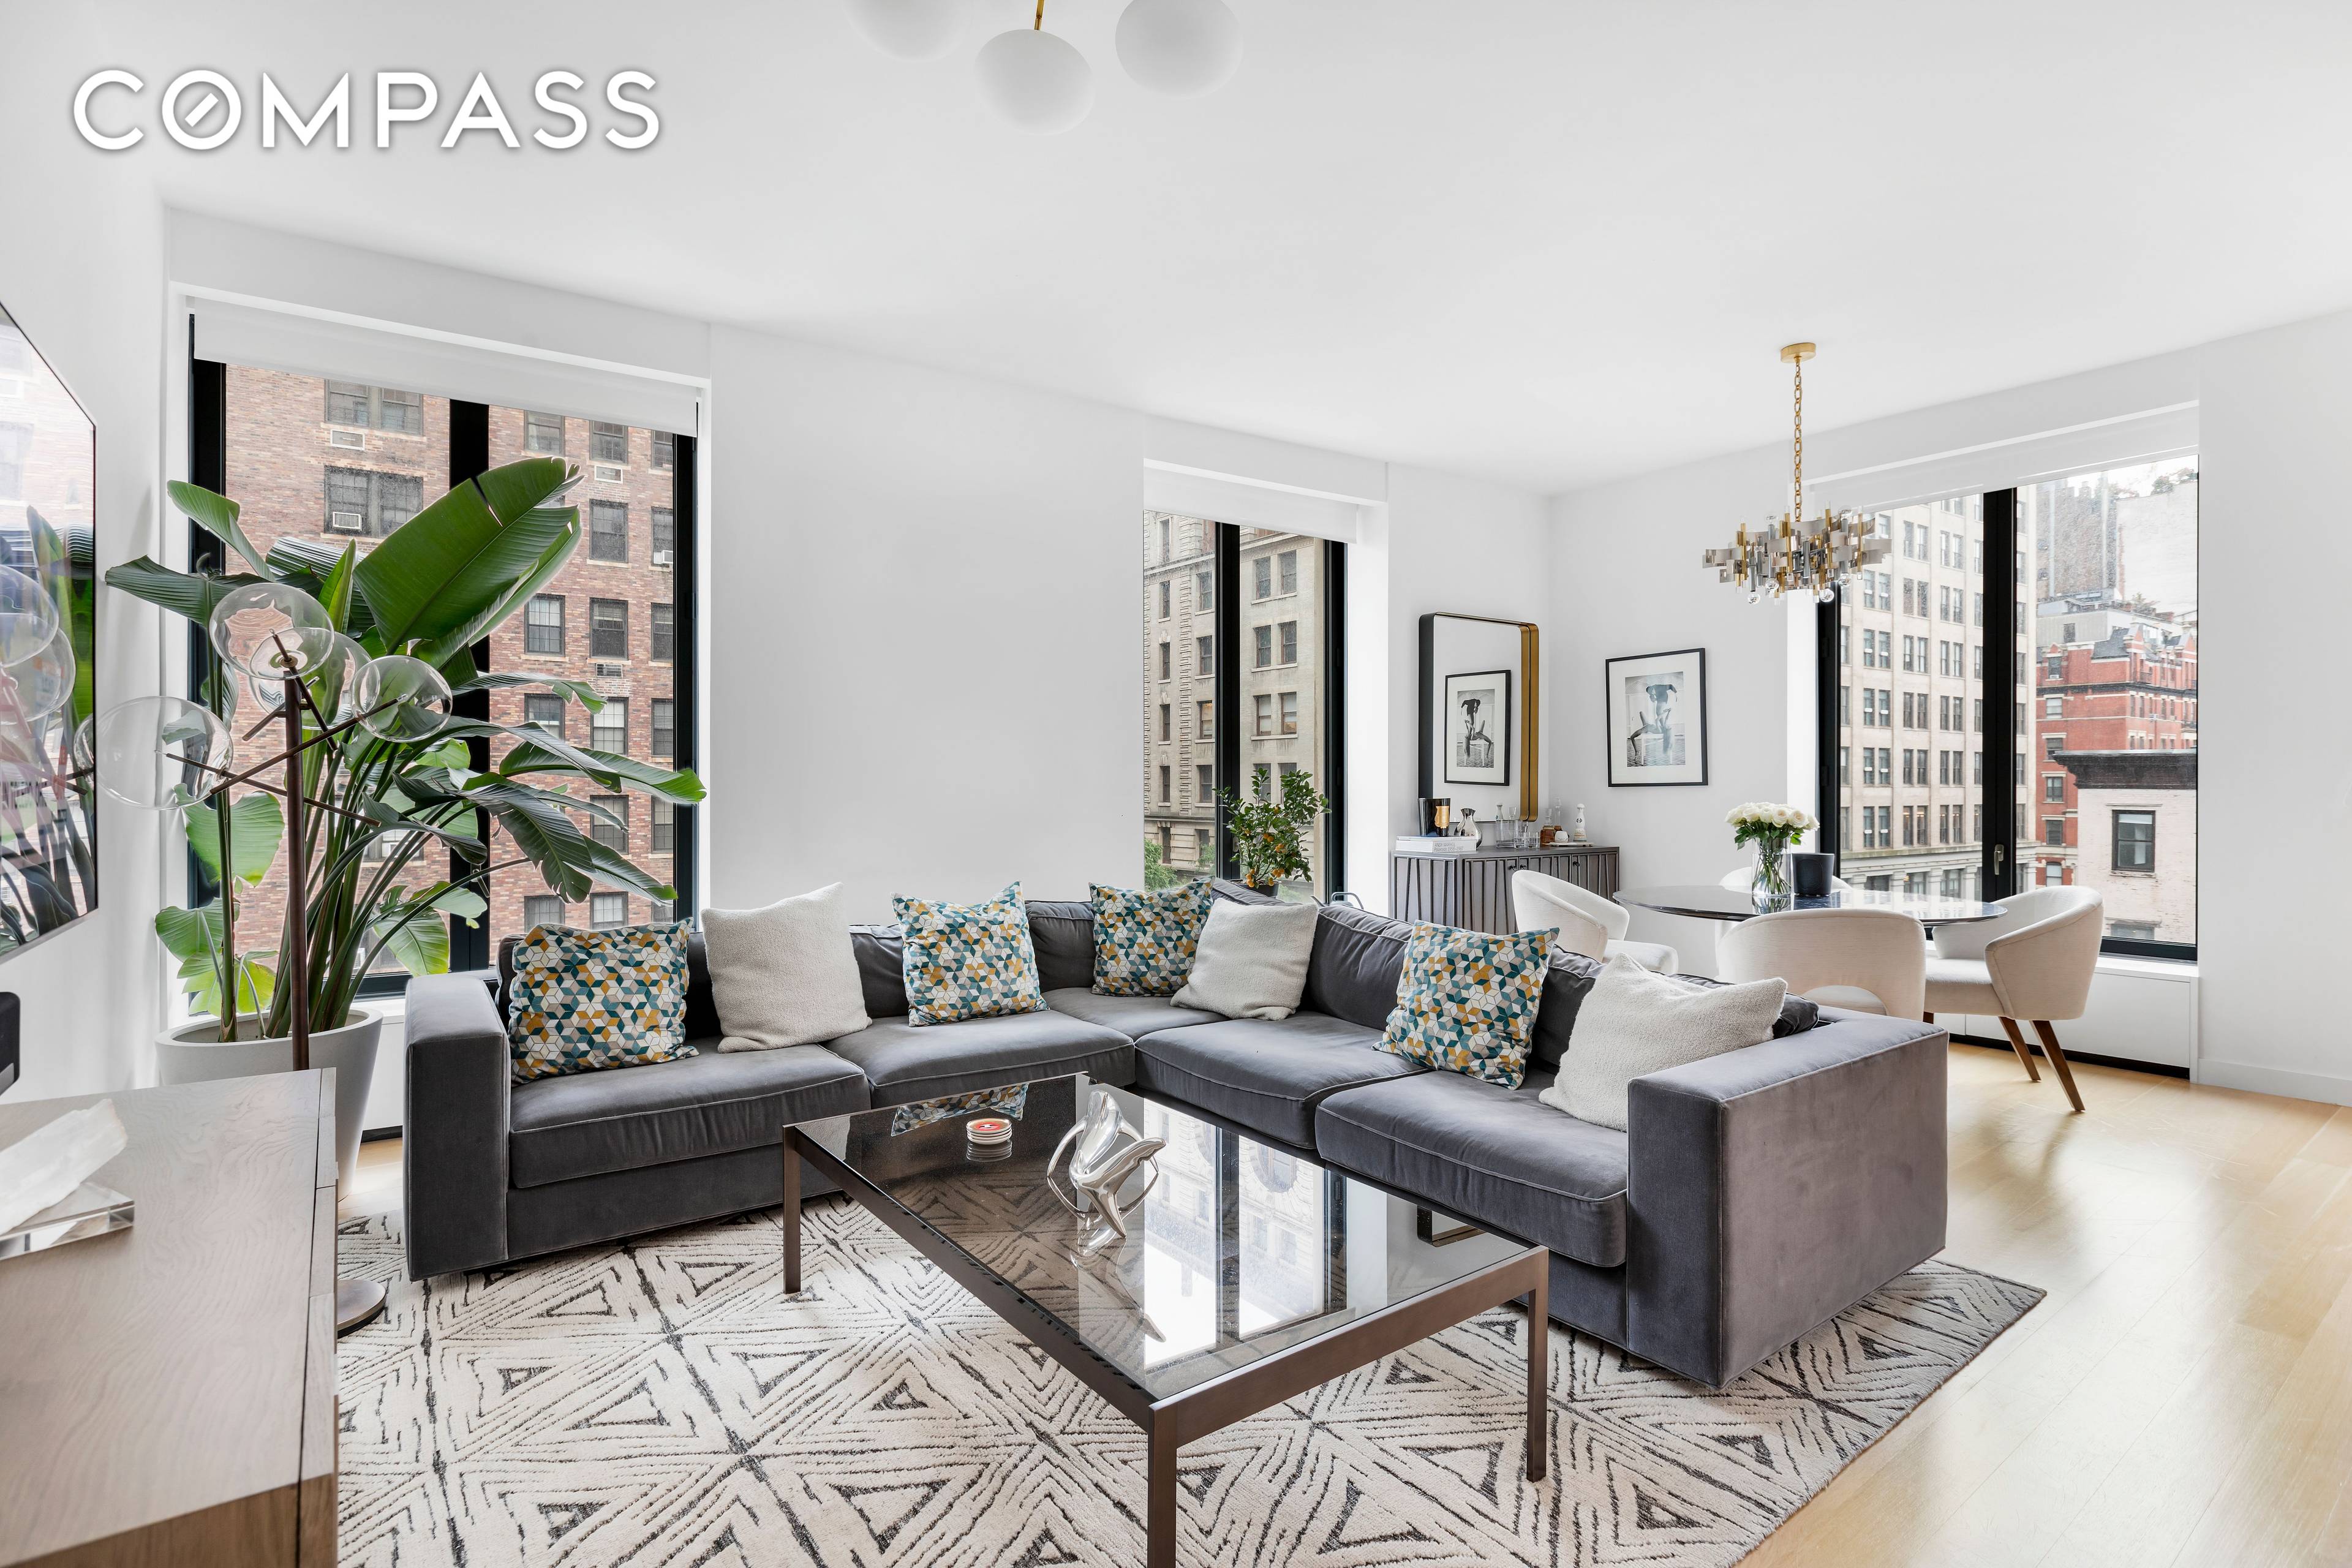 Available for July 1st Elegant minimalism is on full display in this exquisite 2 bedroom, 2 1 2 bathroom apartment in the heart of historic Greenwich Village.